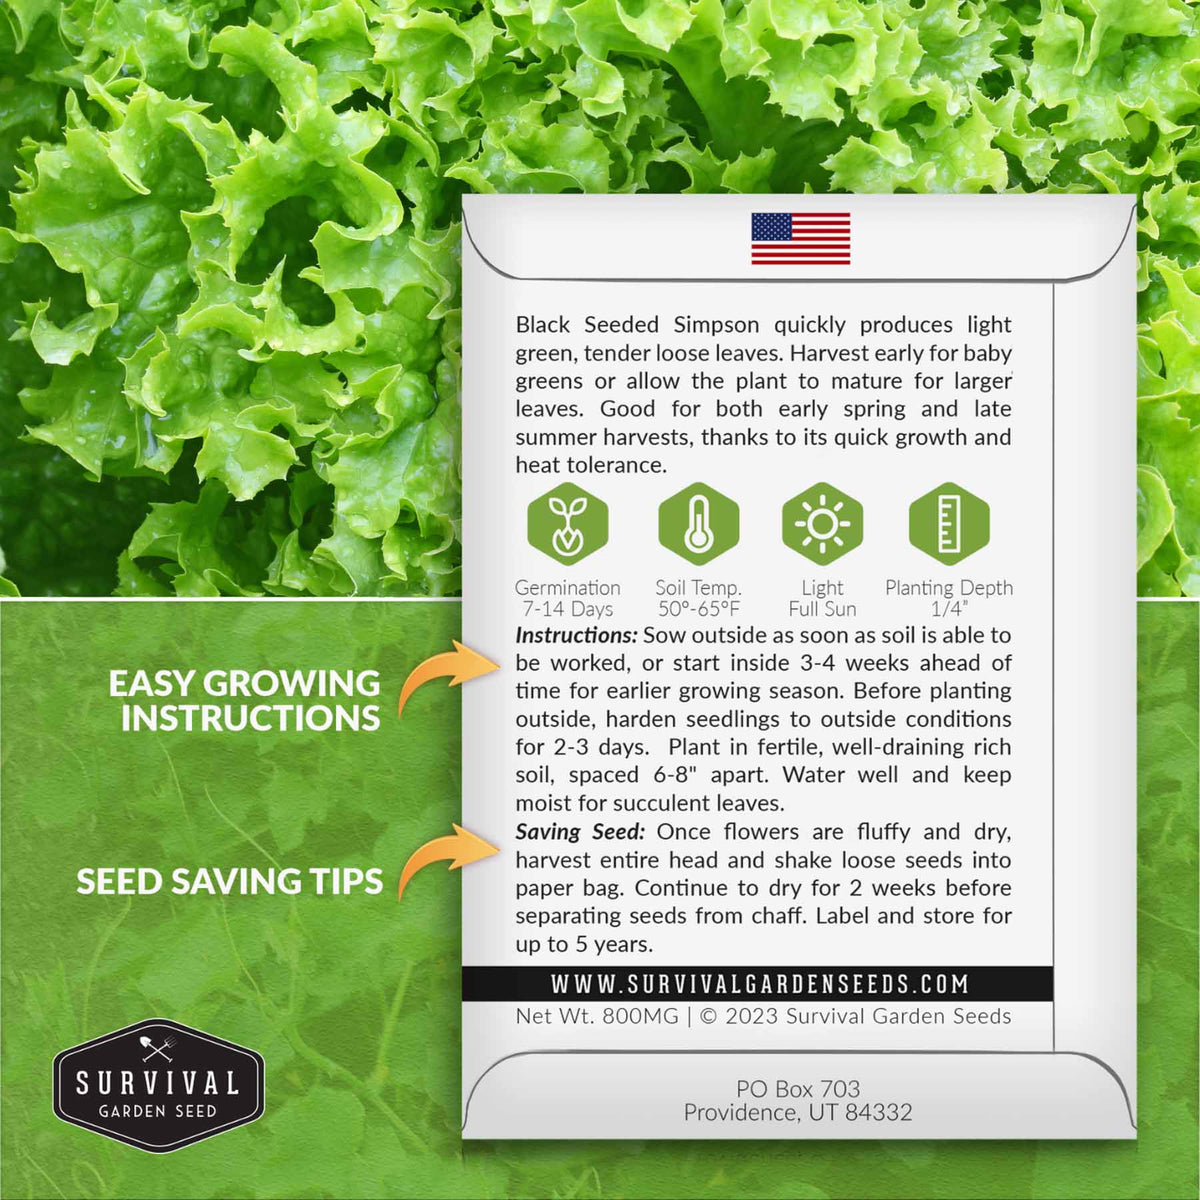 Lettuce seed growing instructions